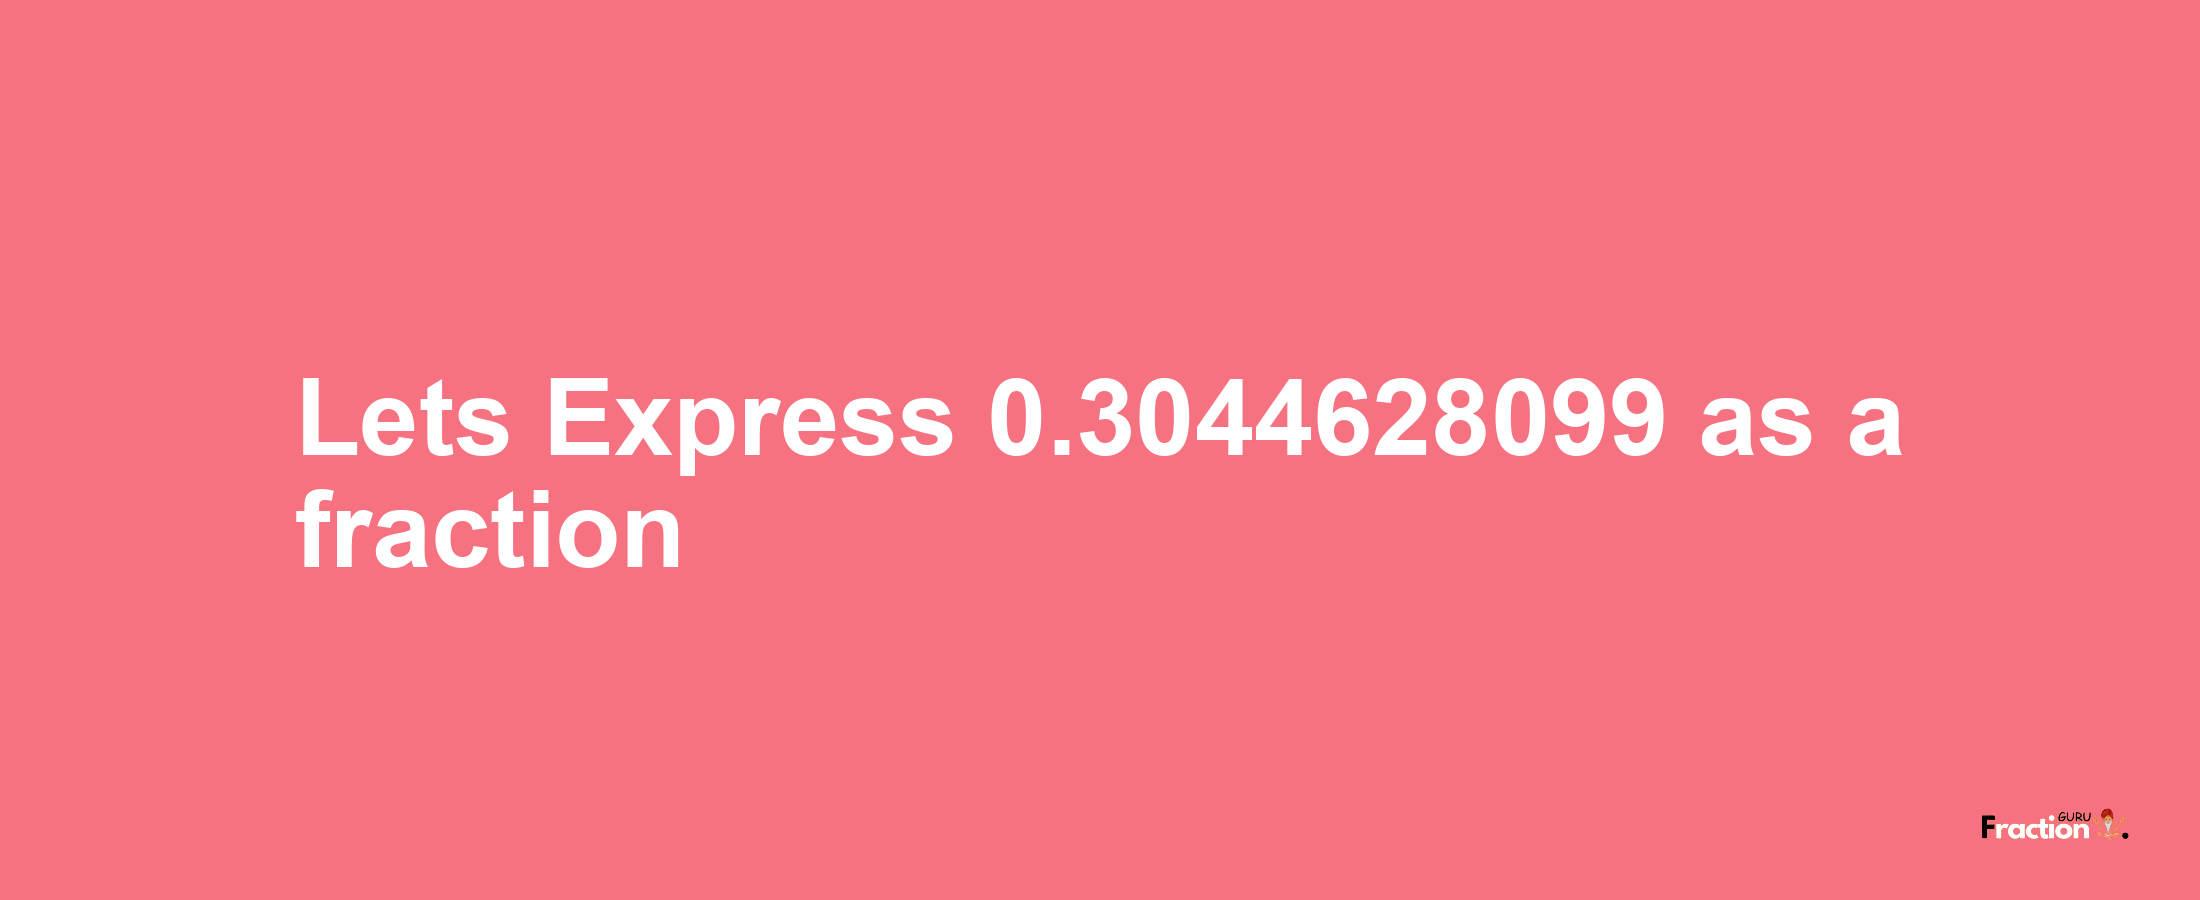 Lets Express 0.3044628099 as afraction